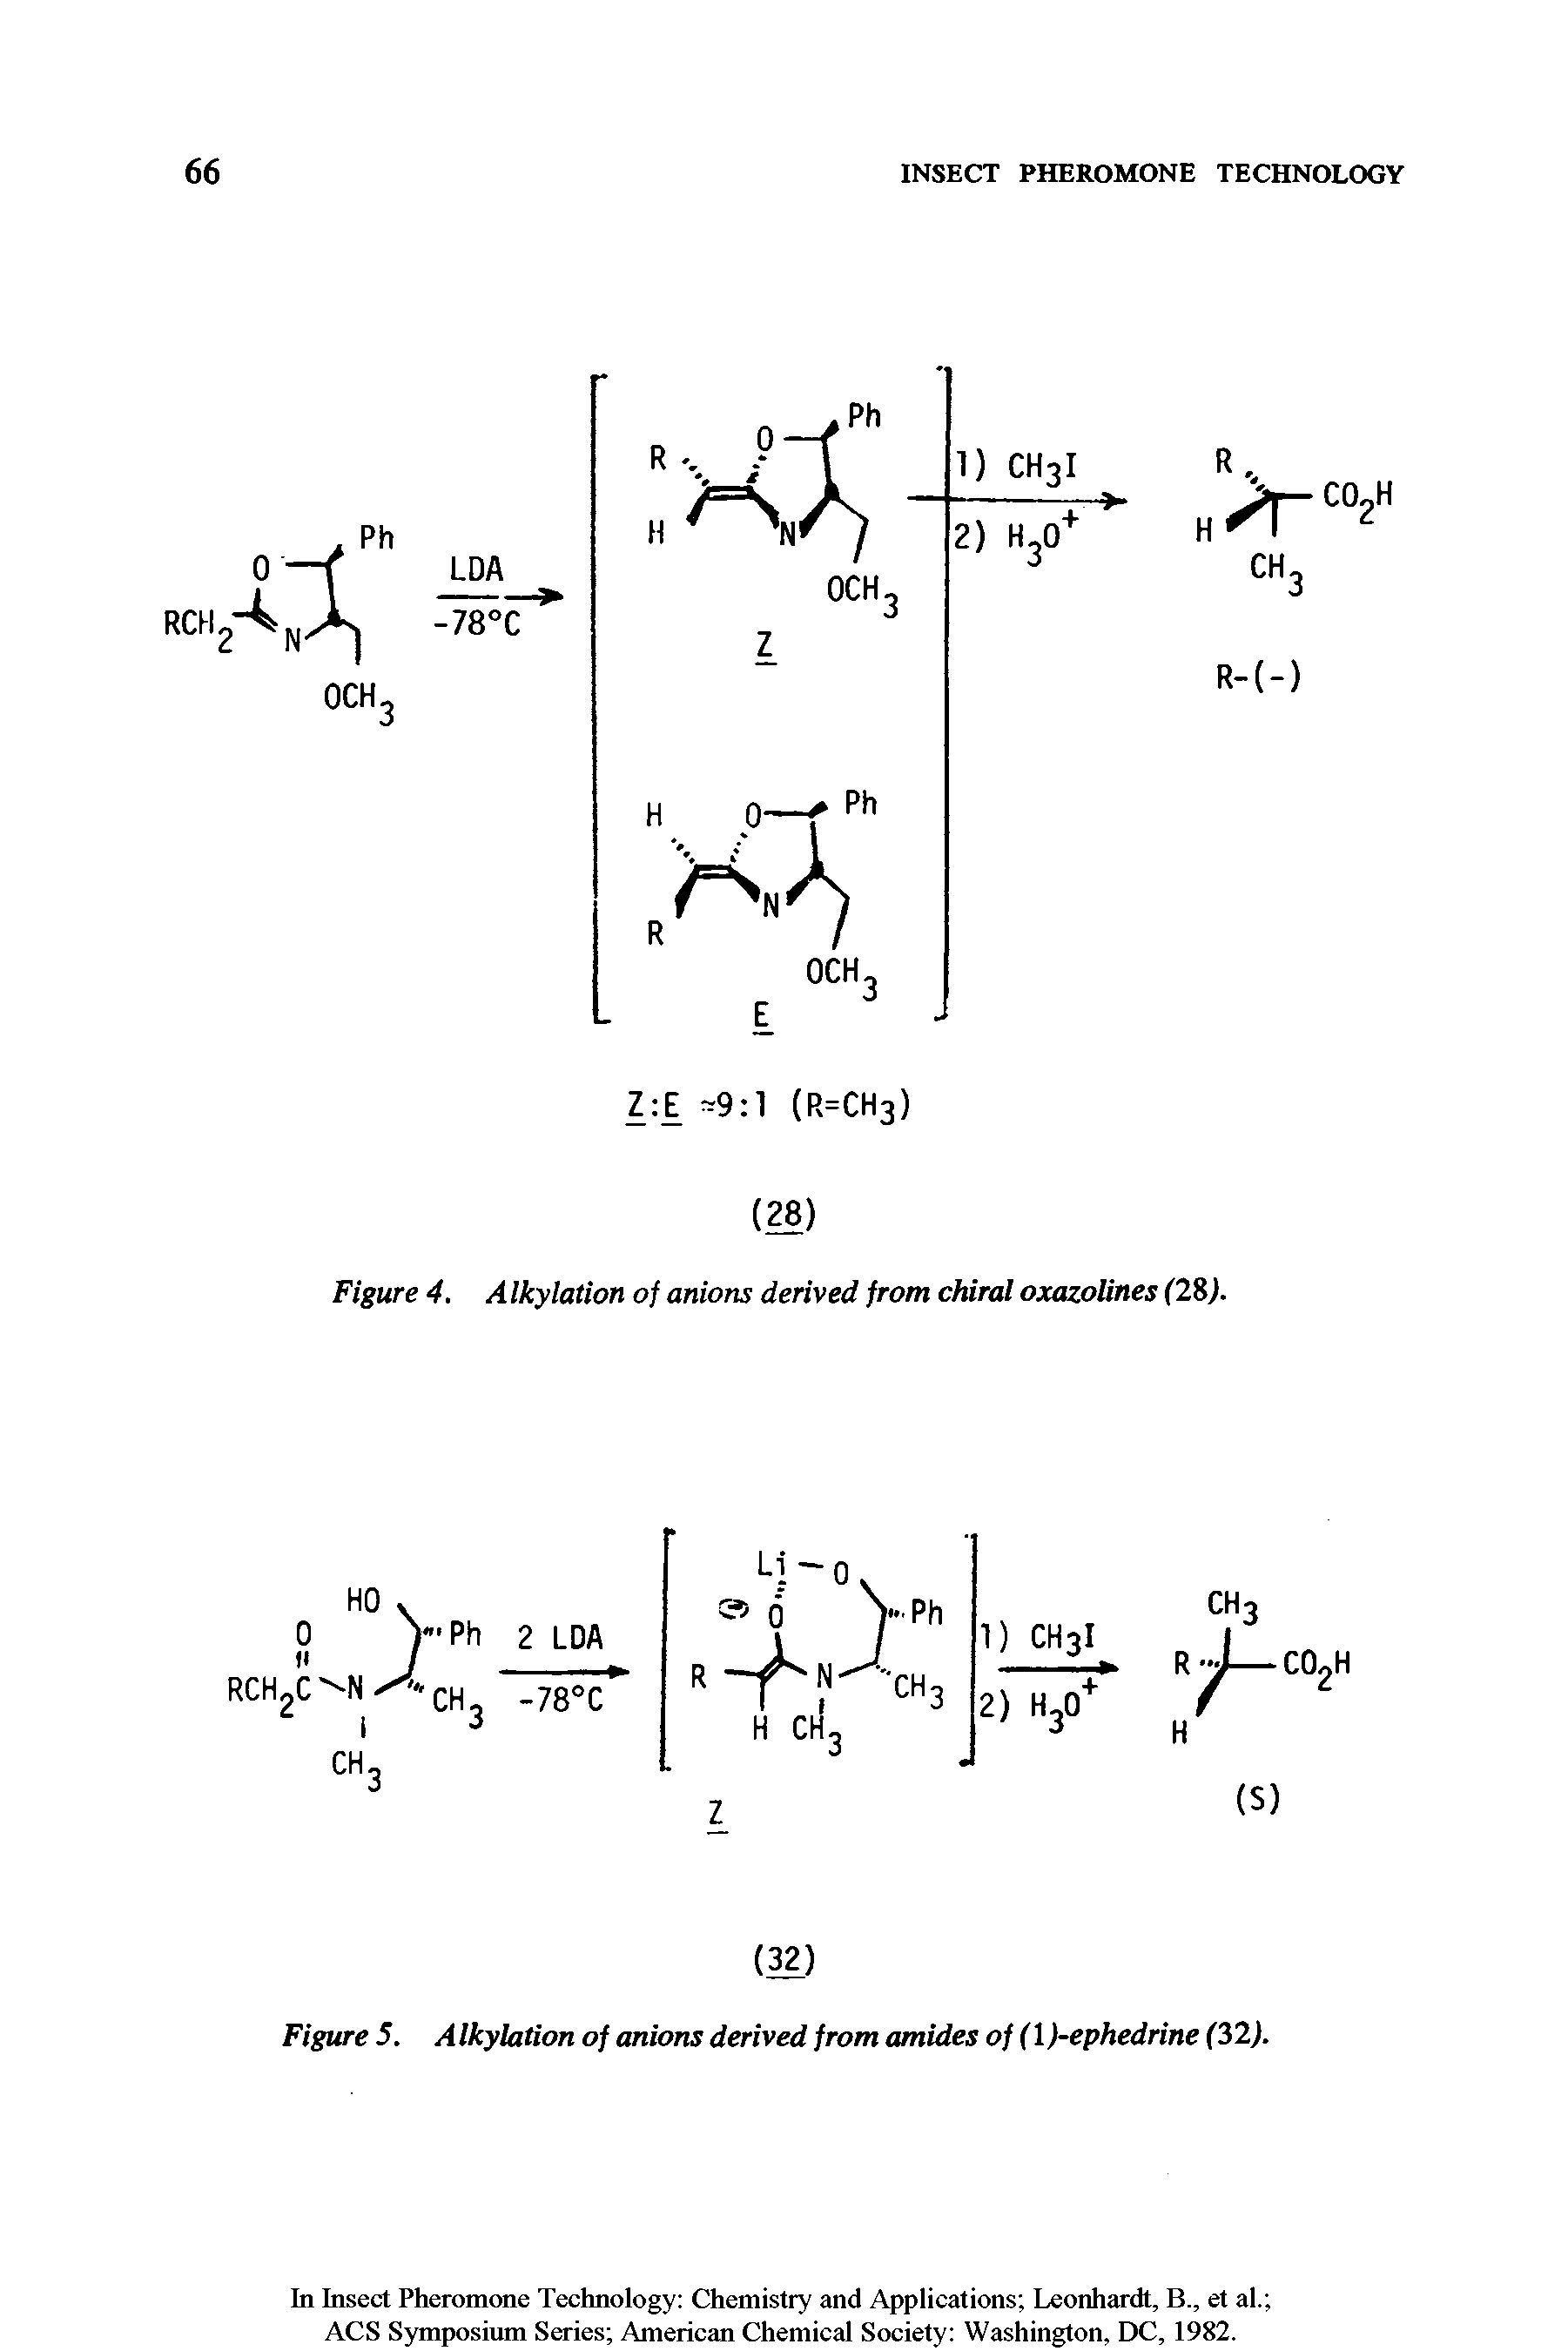 Figure 5. Alkylation of anions derived from amides of (l)-ephedrine (32).